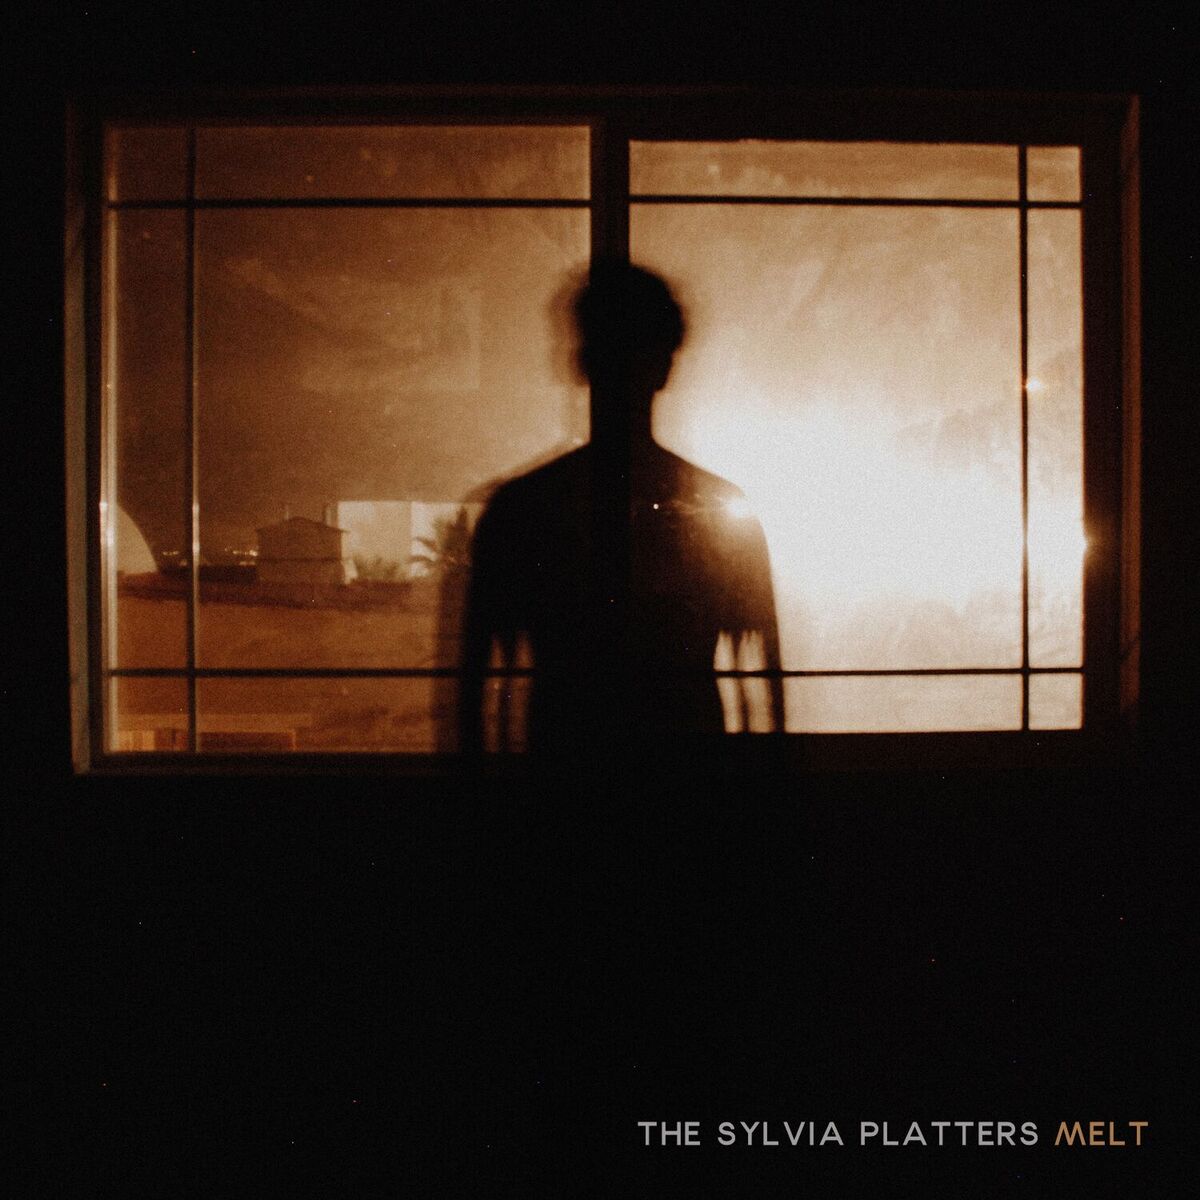 The Sylvia Platters build new album on cohesion and a focused sound